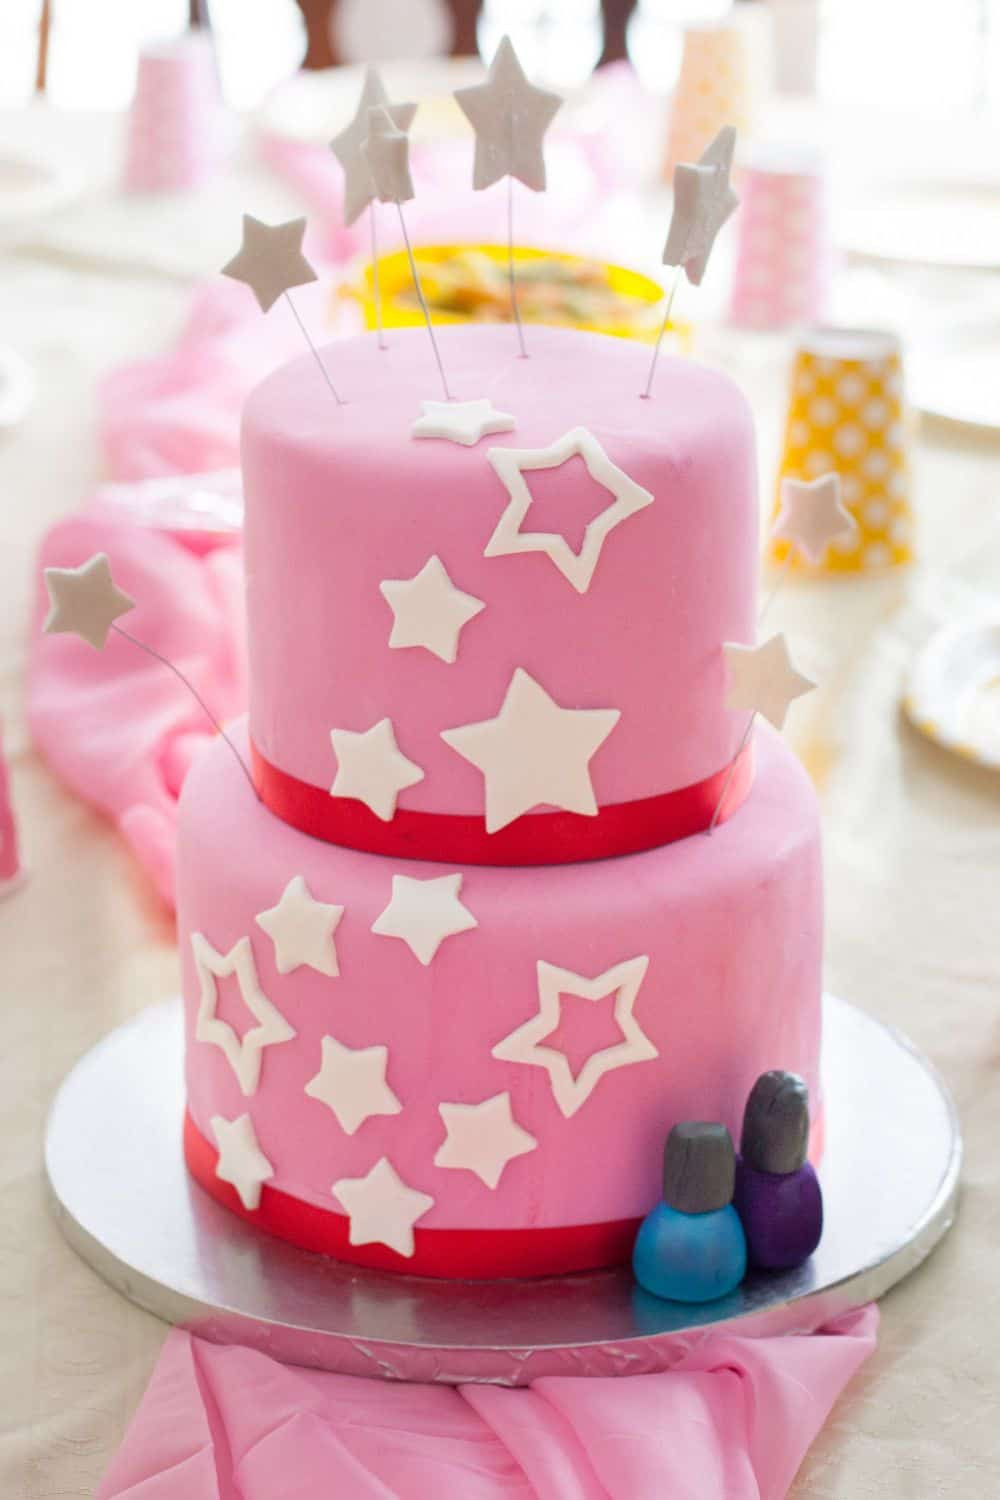 How To Decorate A Birthday Cake
 How to Decorate an American Girl Cake Goo Godmother